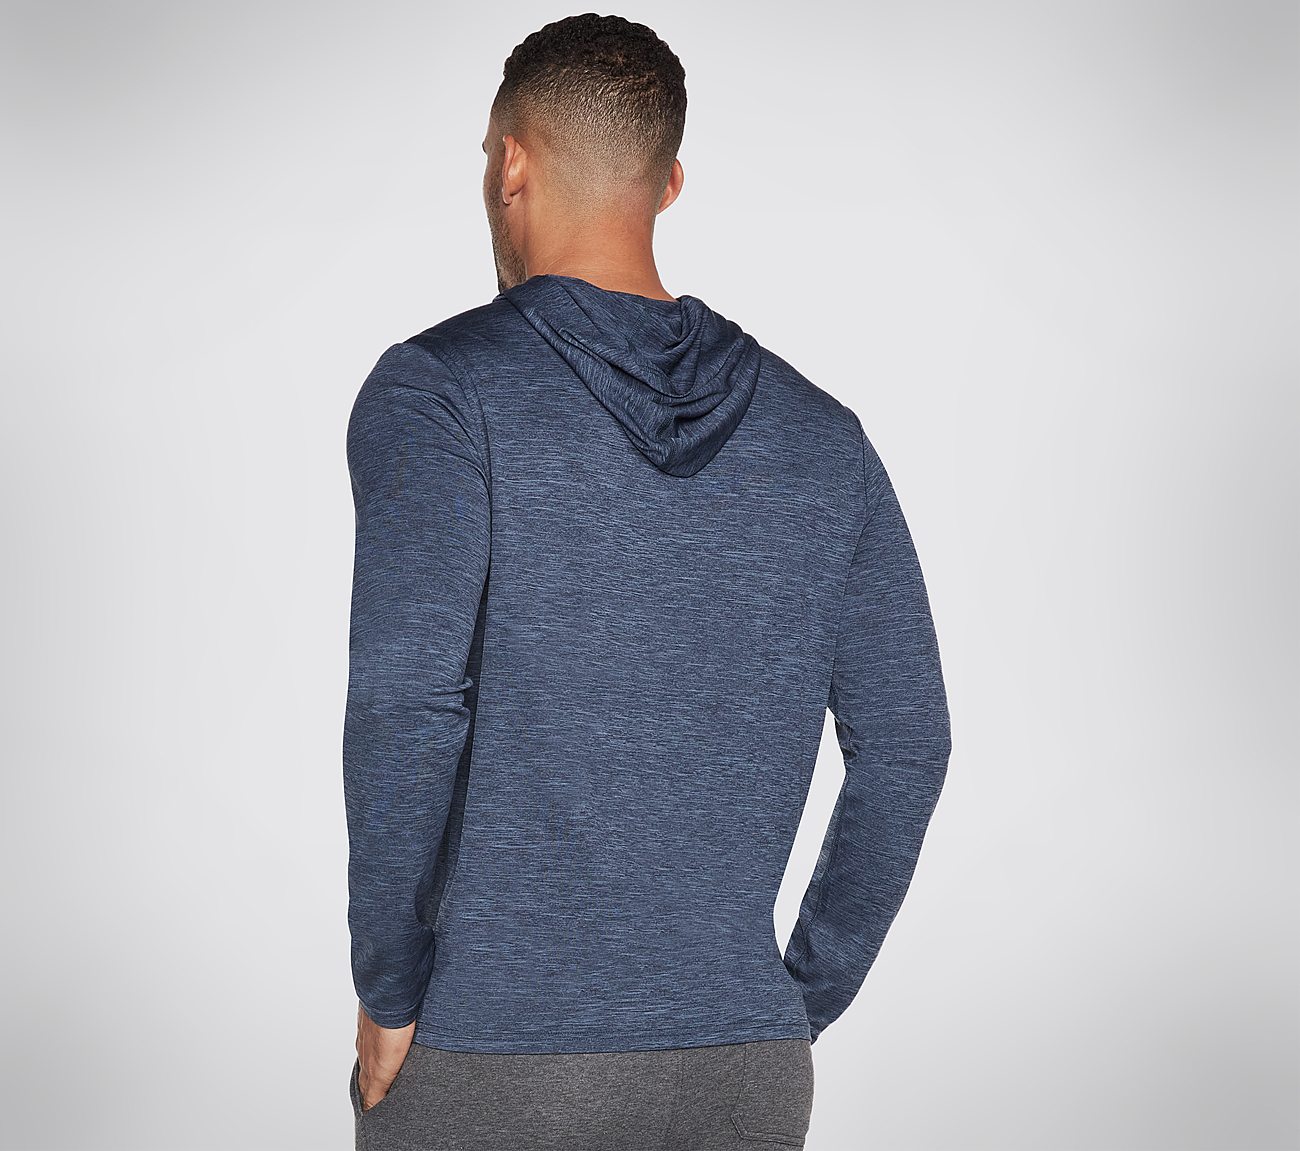 ON THE ROAD HOODED LS, BLUE/GREY Apparels Lateral View